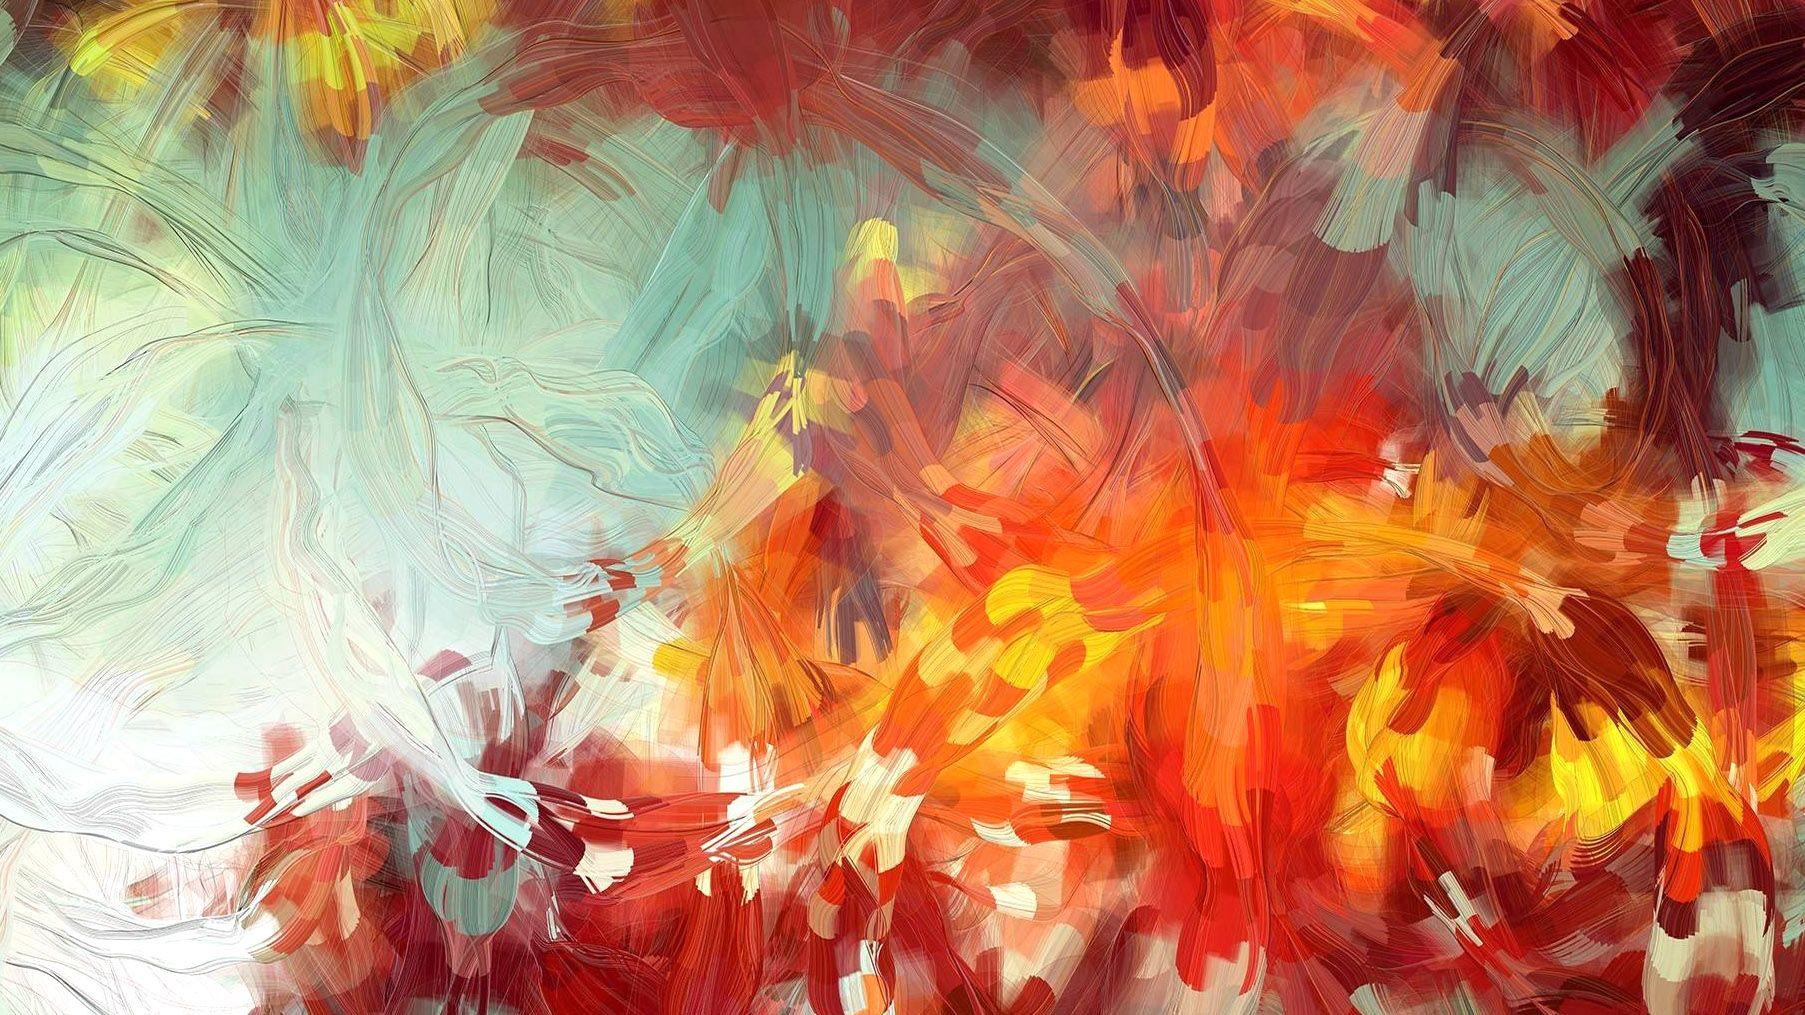 Abstract, Paintings, Art, Wallpaper, , HD Artworks, Widescreen